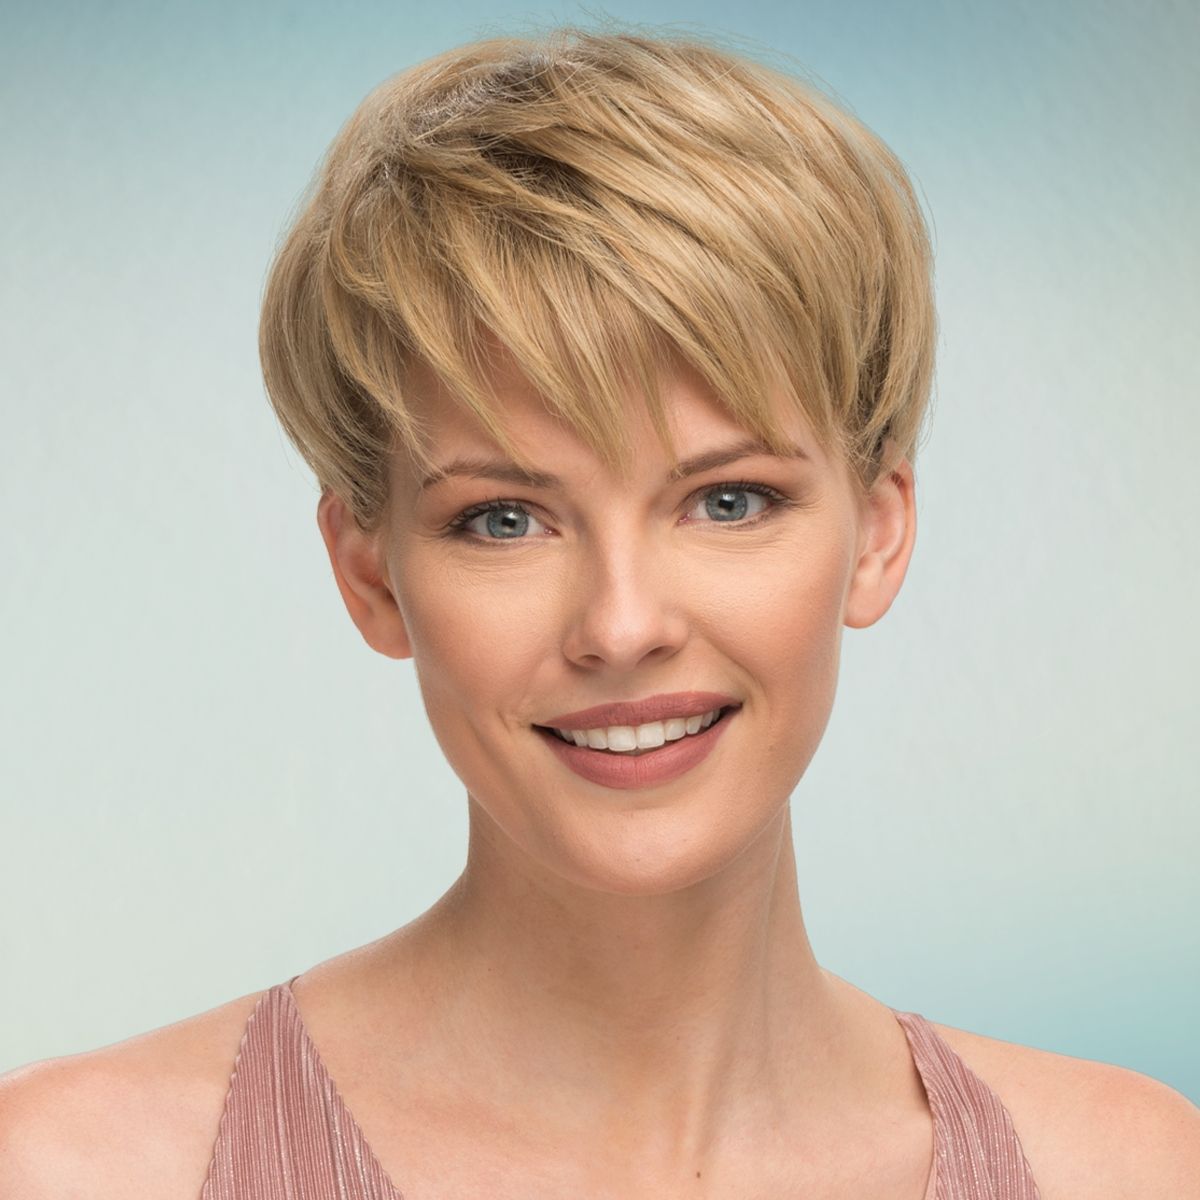 Famous Classic Pixie Hairstyles Inside The Classic Pixie Haircut Is A Contemporary Hairstyle That's Short (View 17 of 20)